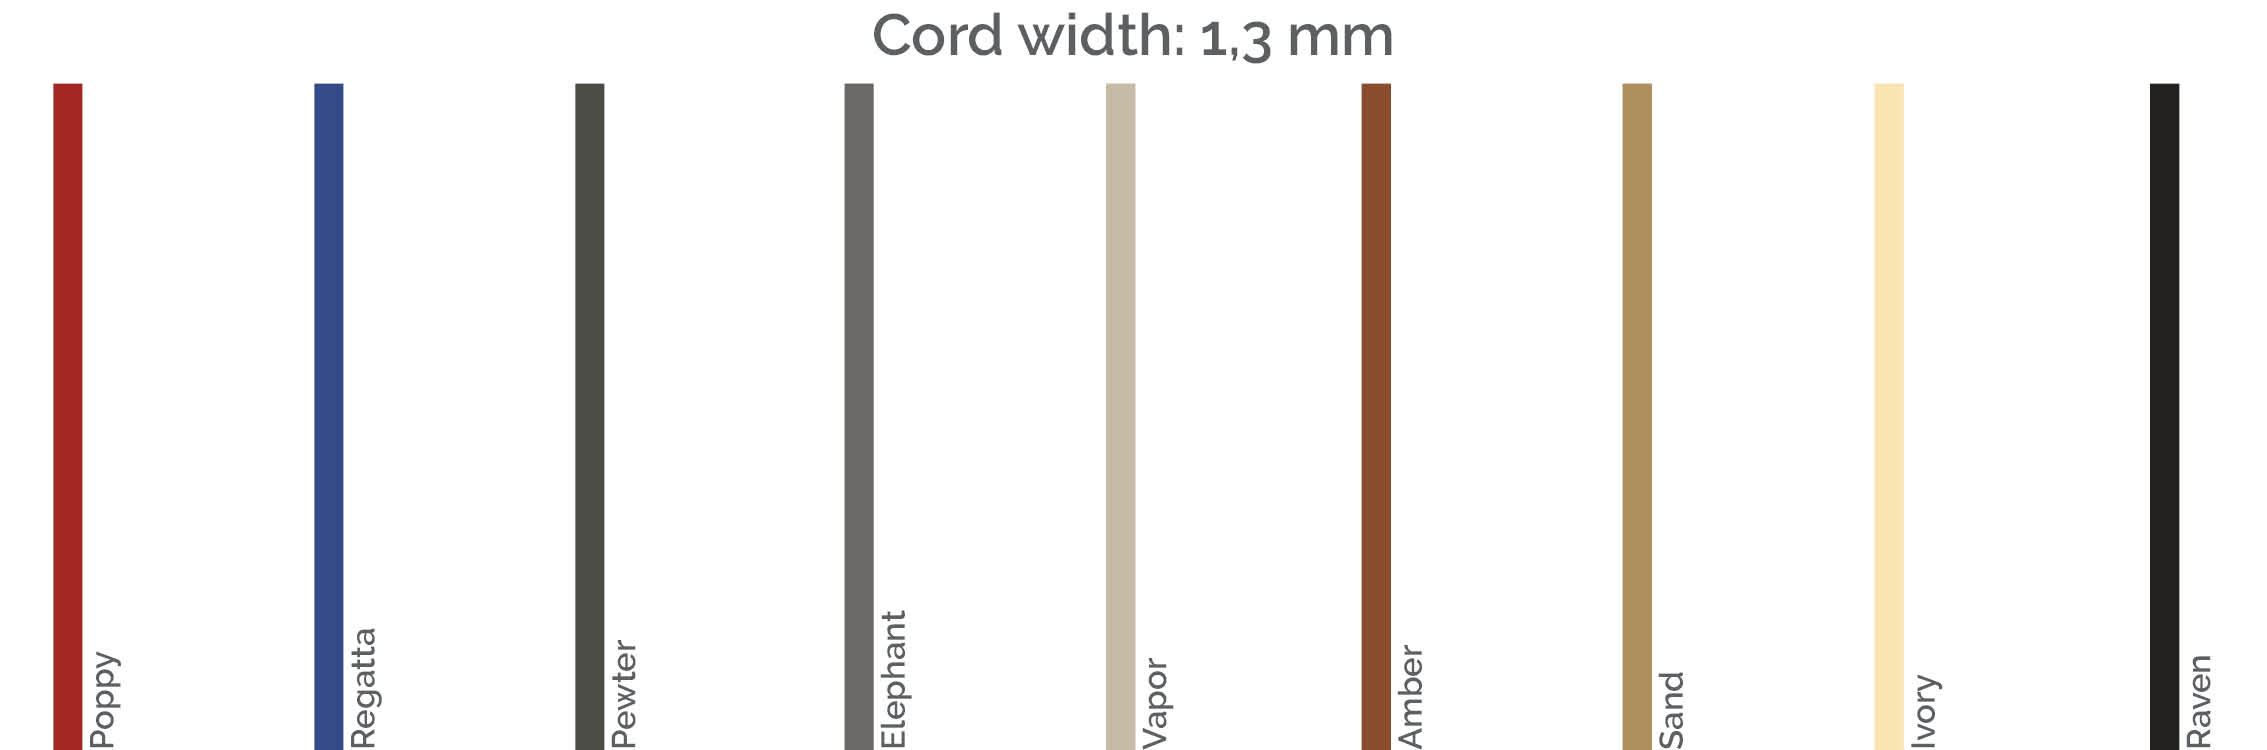 « In » Line cable cord finishes